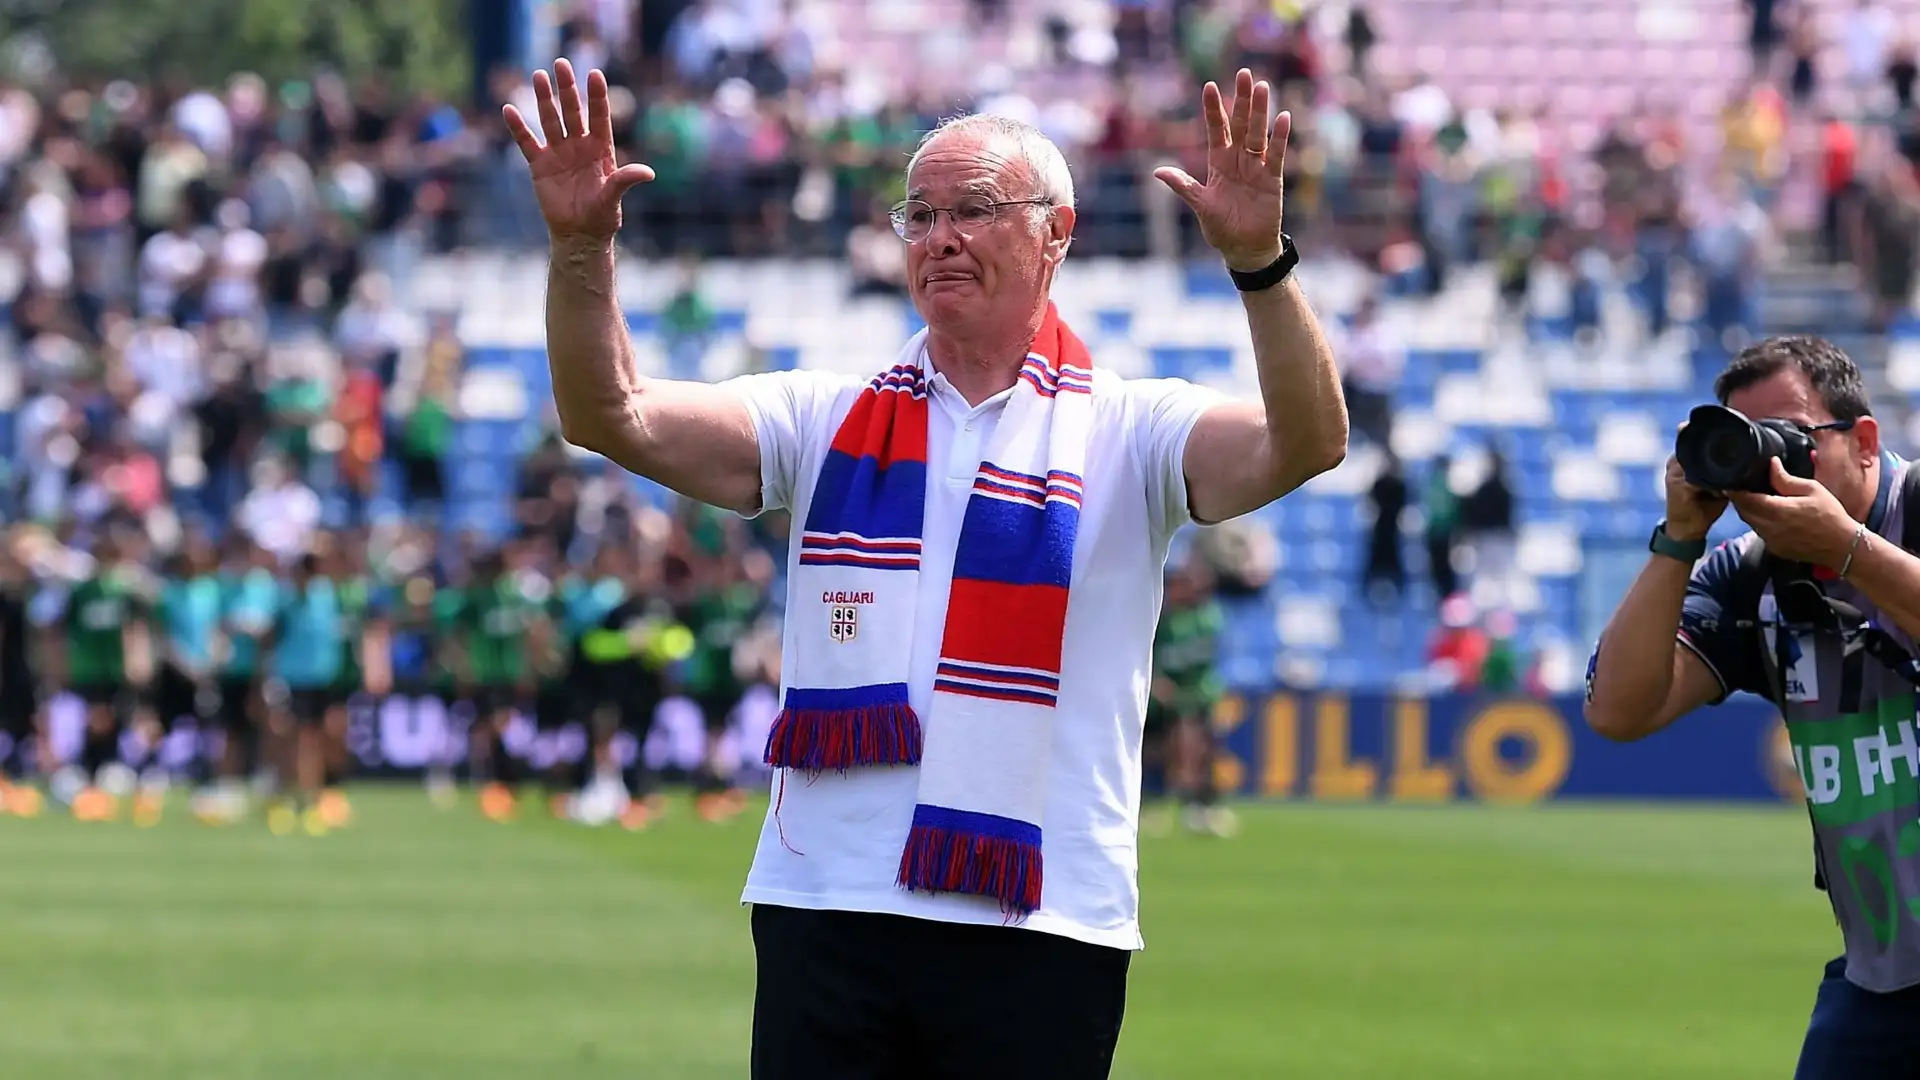 Claudio Ranieri set to retire from football at 72 as legendary former Leicester boss steps down at Cagliari after steering Serie A club away from relegation zone